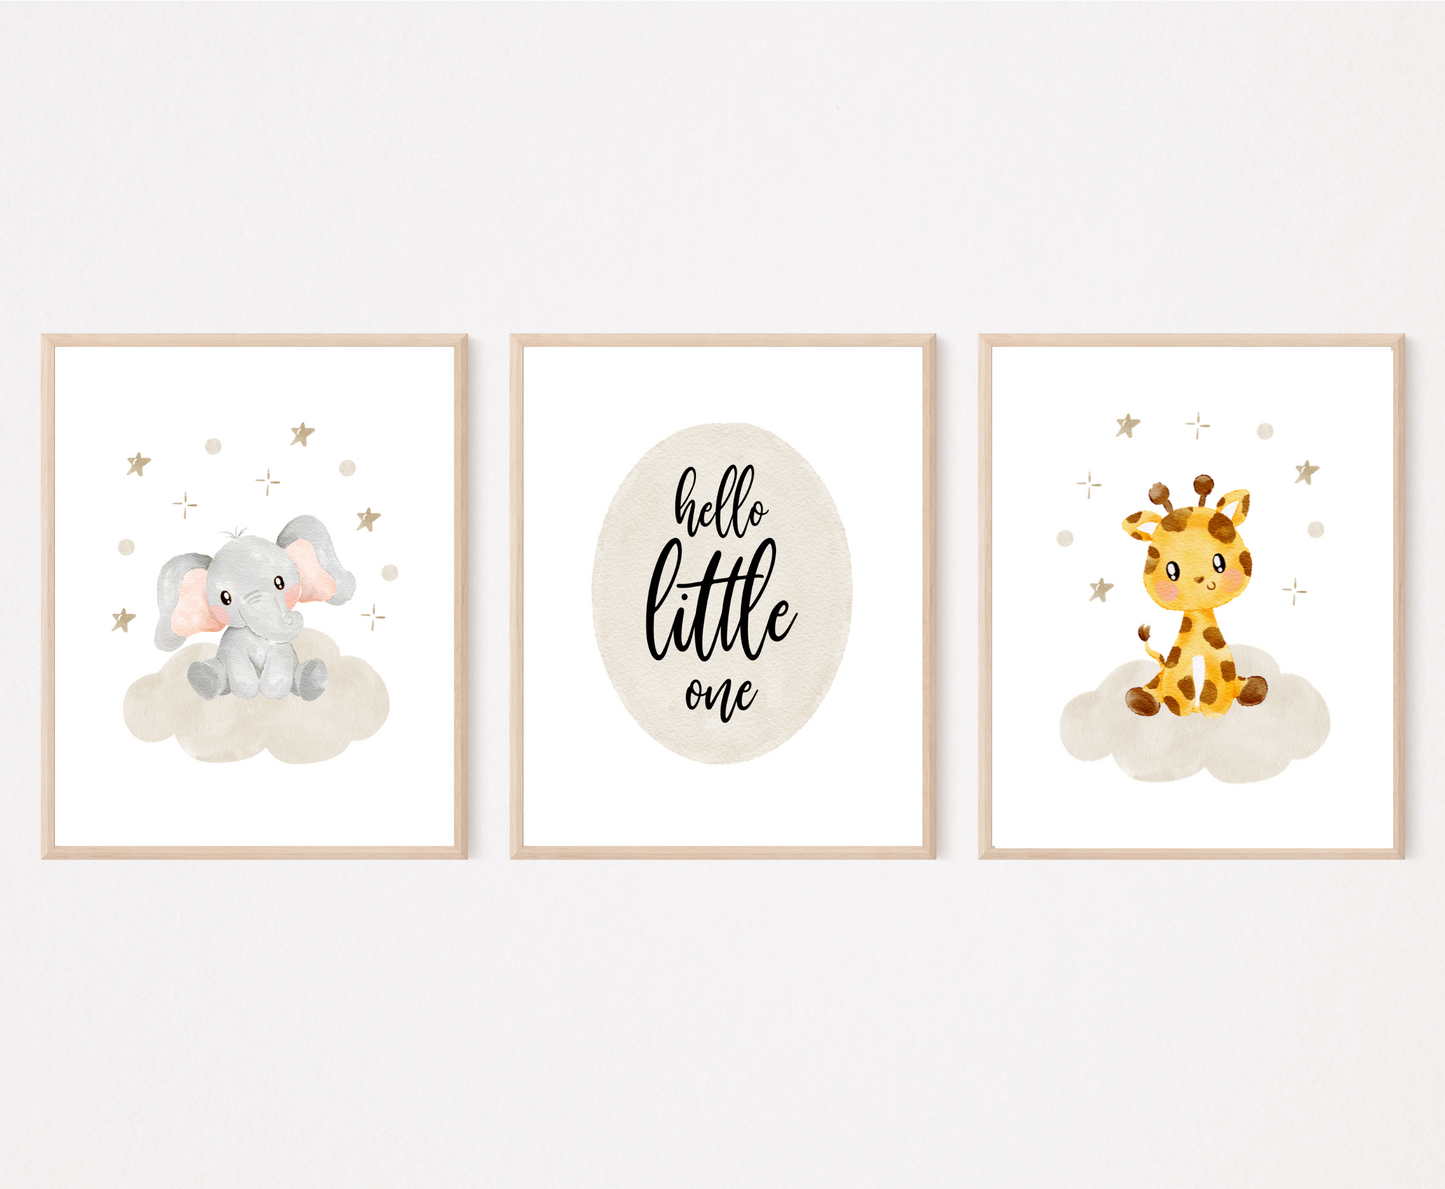 A picture of three digital printable graphics. The first one shows a graphic of a grey baby elephant sitting on a grey cloud with mini stars surrounding its head. The middle one has a piece of writing inside a grey oval shape that says “Hello little one”. The last one shows a cute baby giraffe sitting on a grey cloud with mini stars surrounding its head.